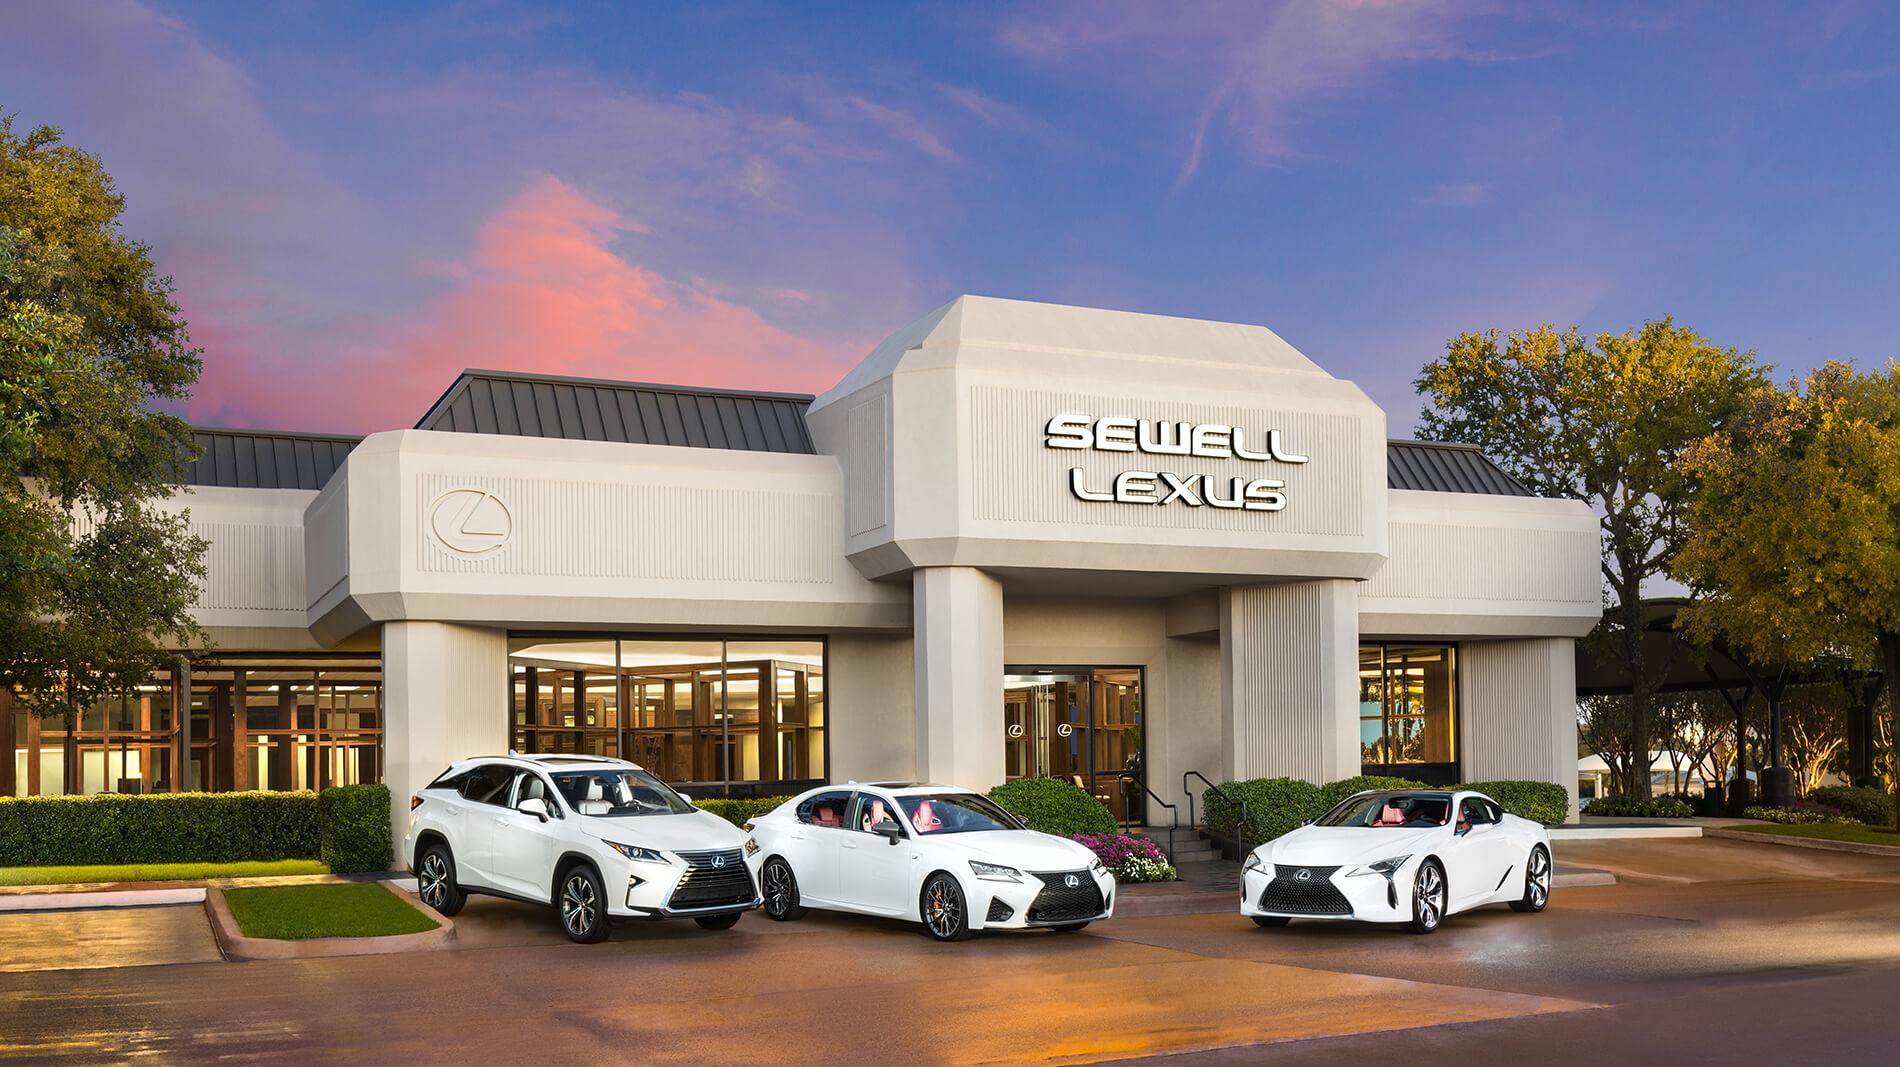 Sewell Lexus of Fort Worth Exterior Photo